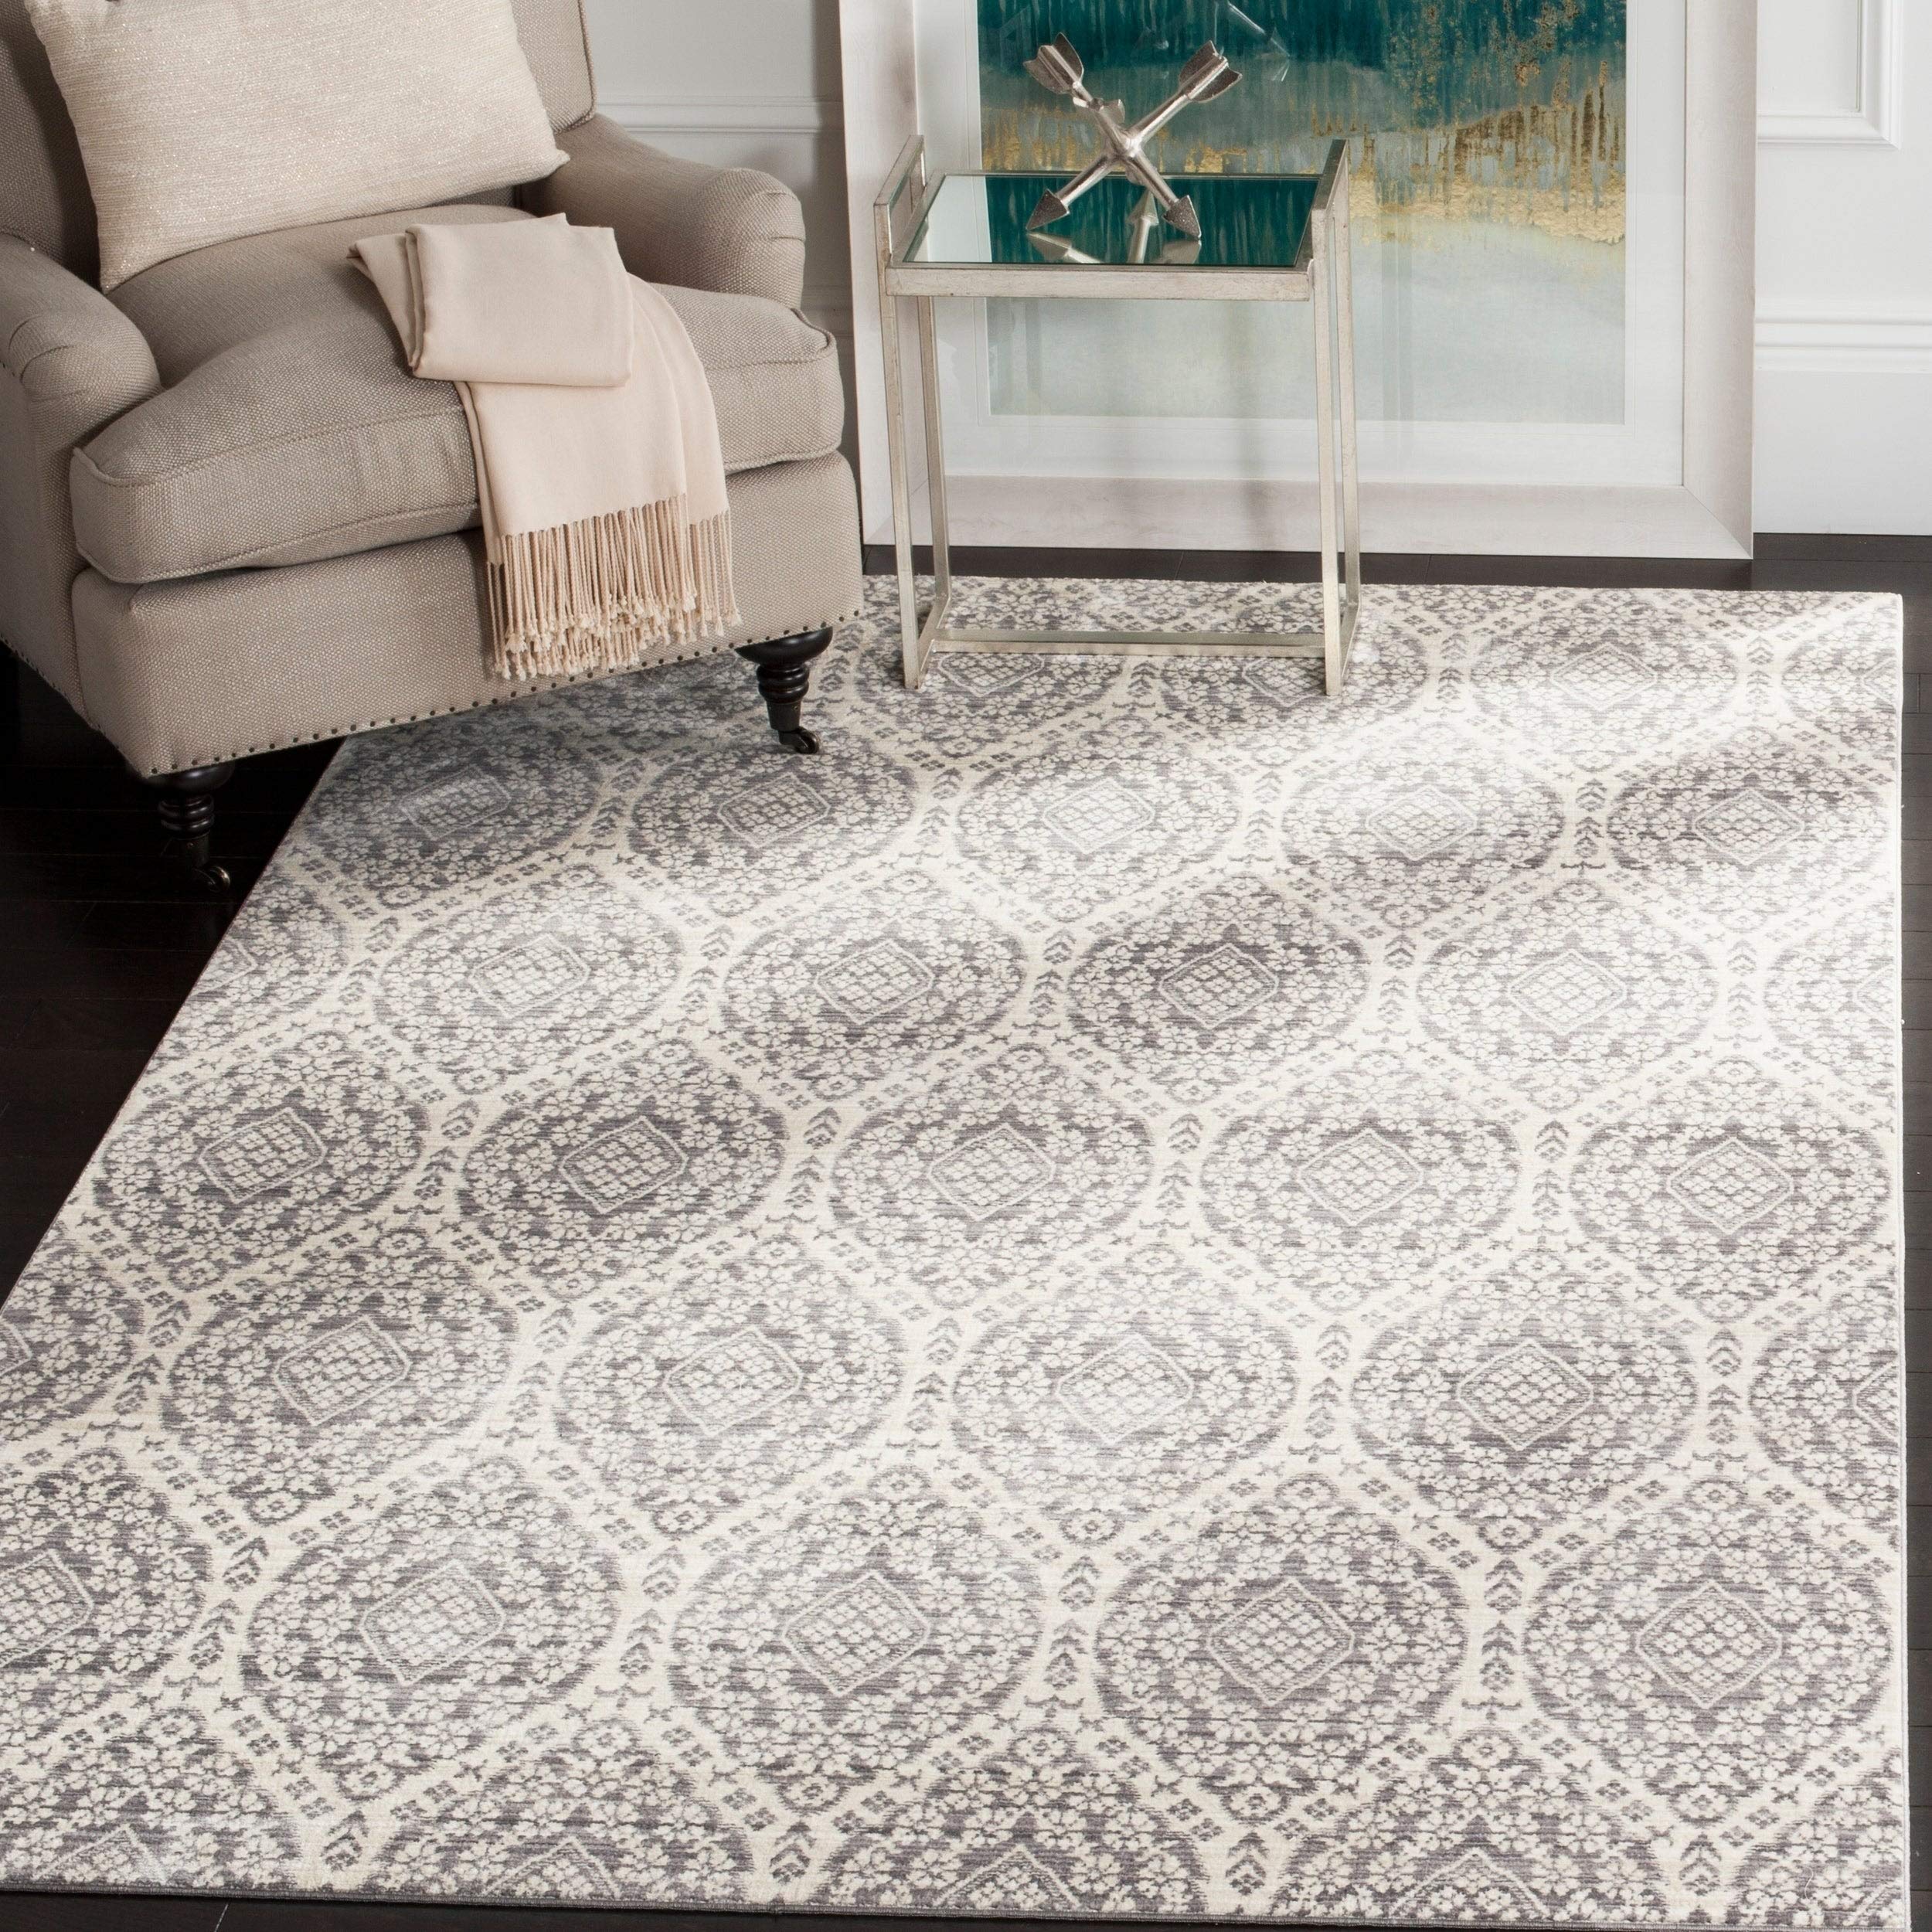 SAFAVIEH Valencia Collection Area Rug - 9' x 12', Mauve & Cream, Boho Chic Distressed Design, Non-Shedding & Easy Care, Ideal for High Traffic Areas in Living Room, Bedroom (VAL206A)